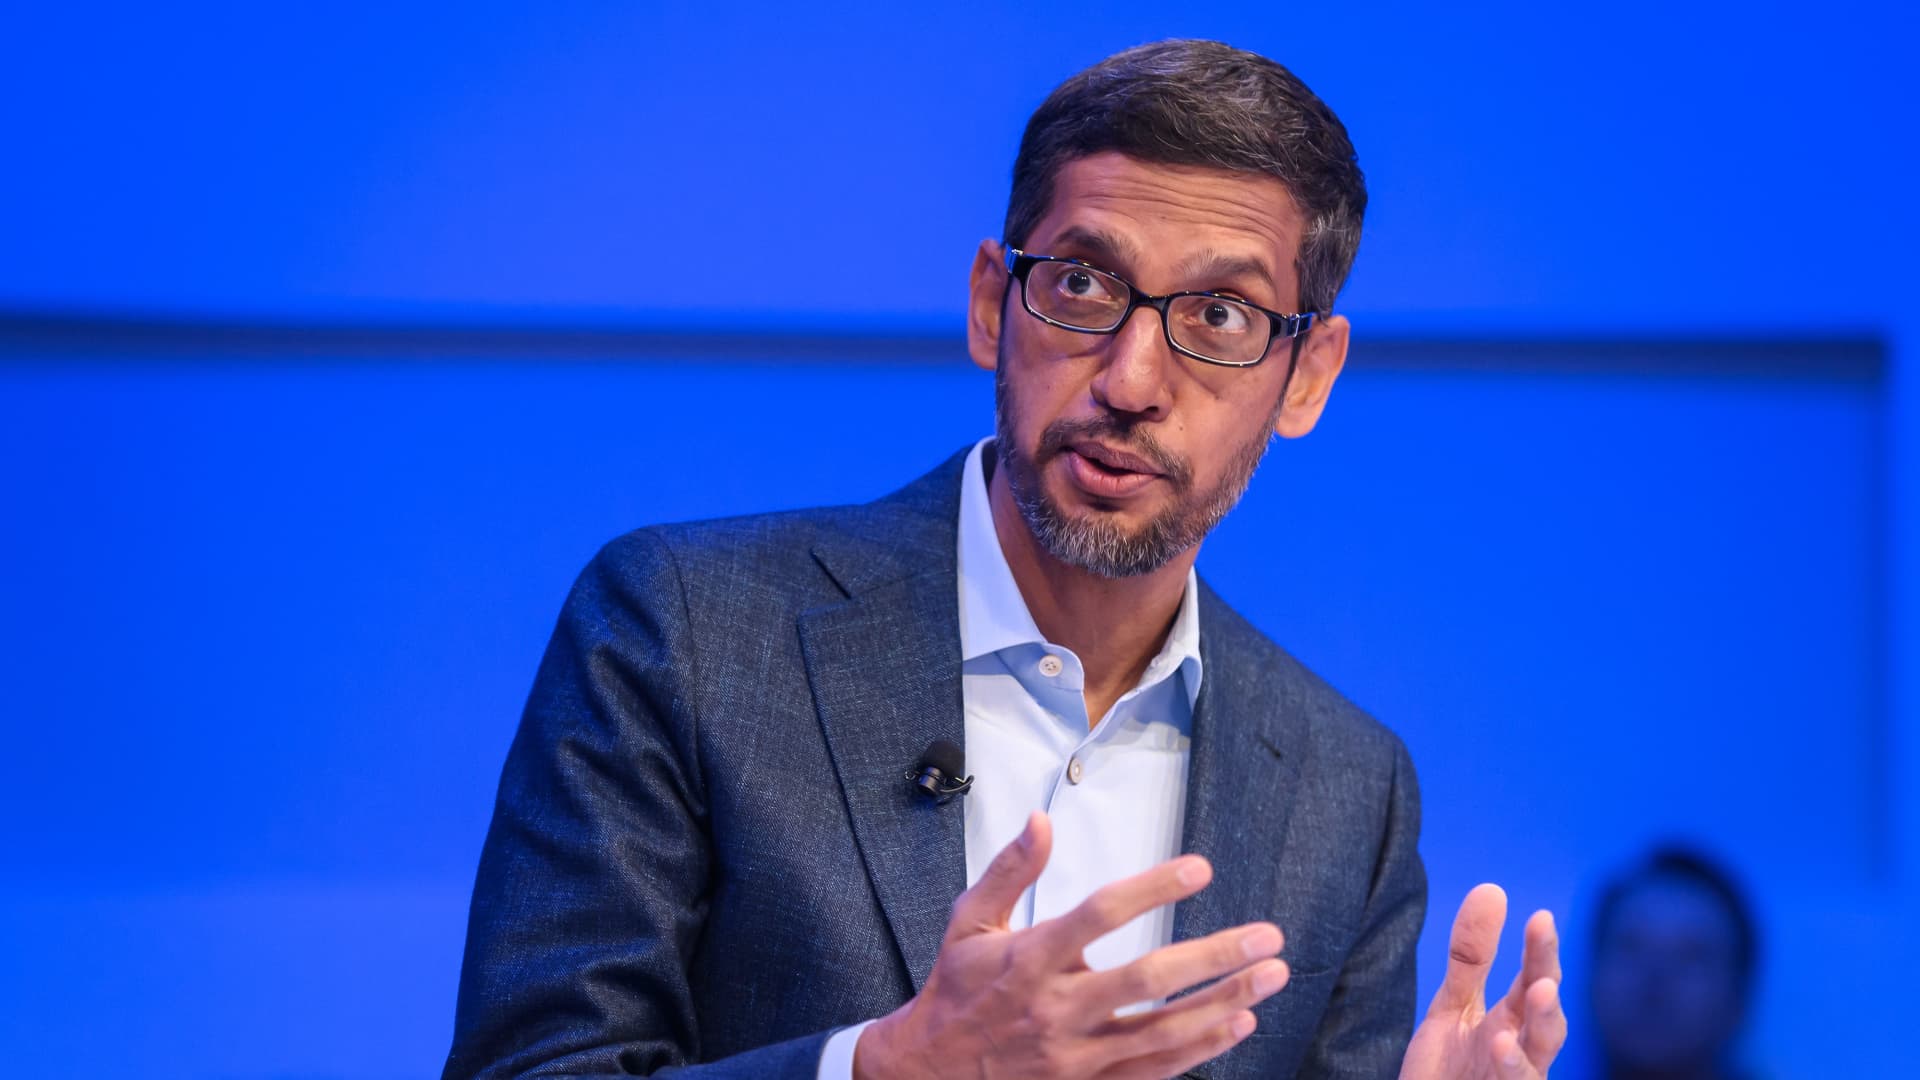 Alphabet CEO Sundar Pichai gestures during a session at the World Economic Forum (WEF) annual meeting in Davos, on January 22, 2020.